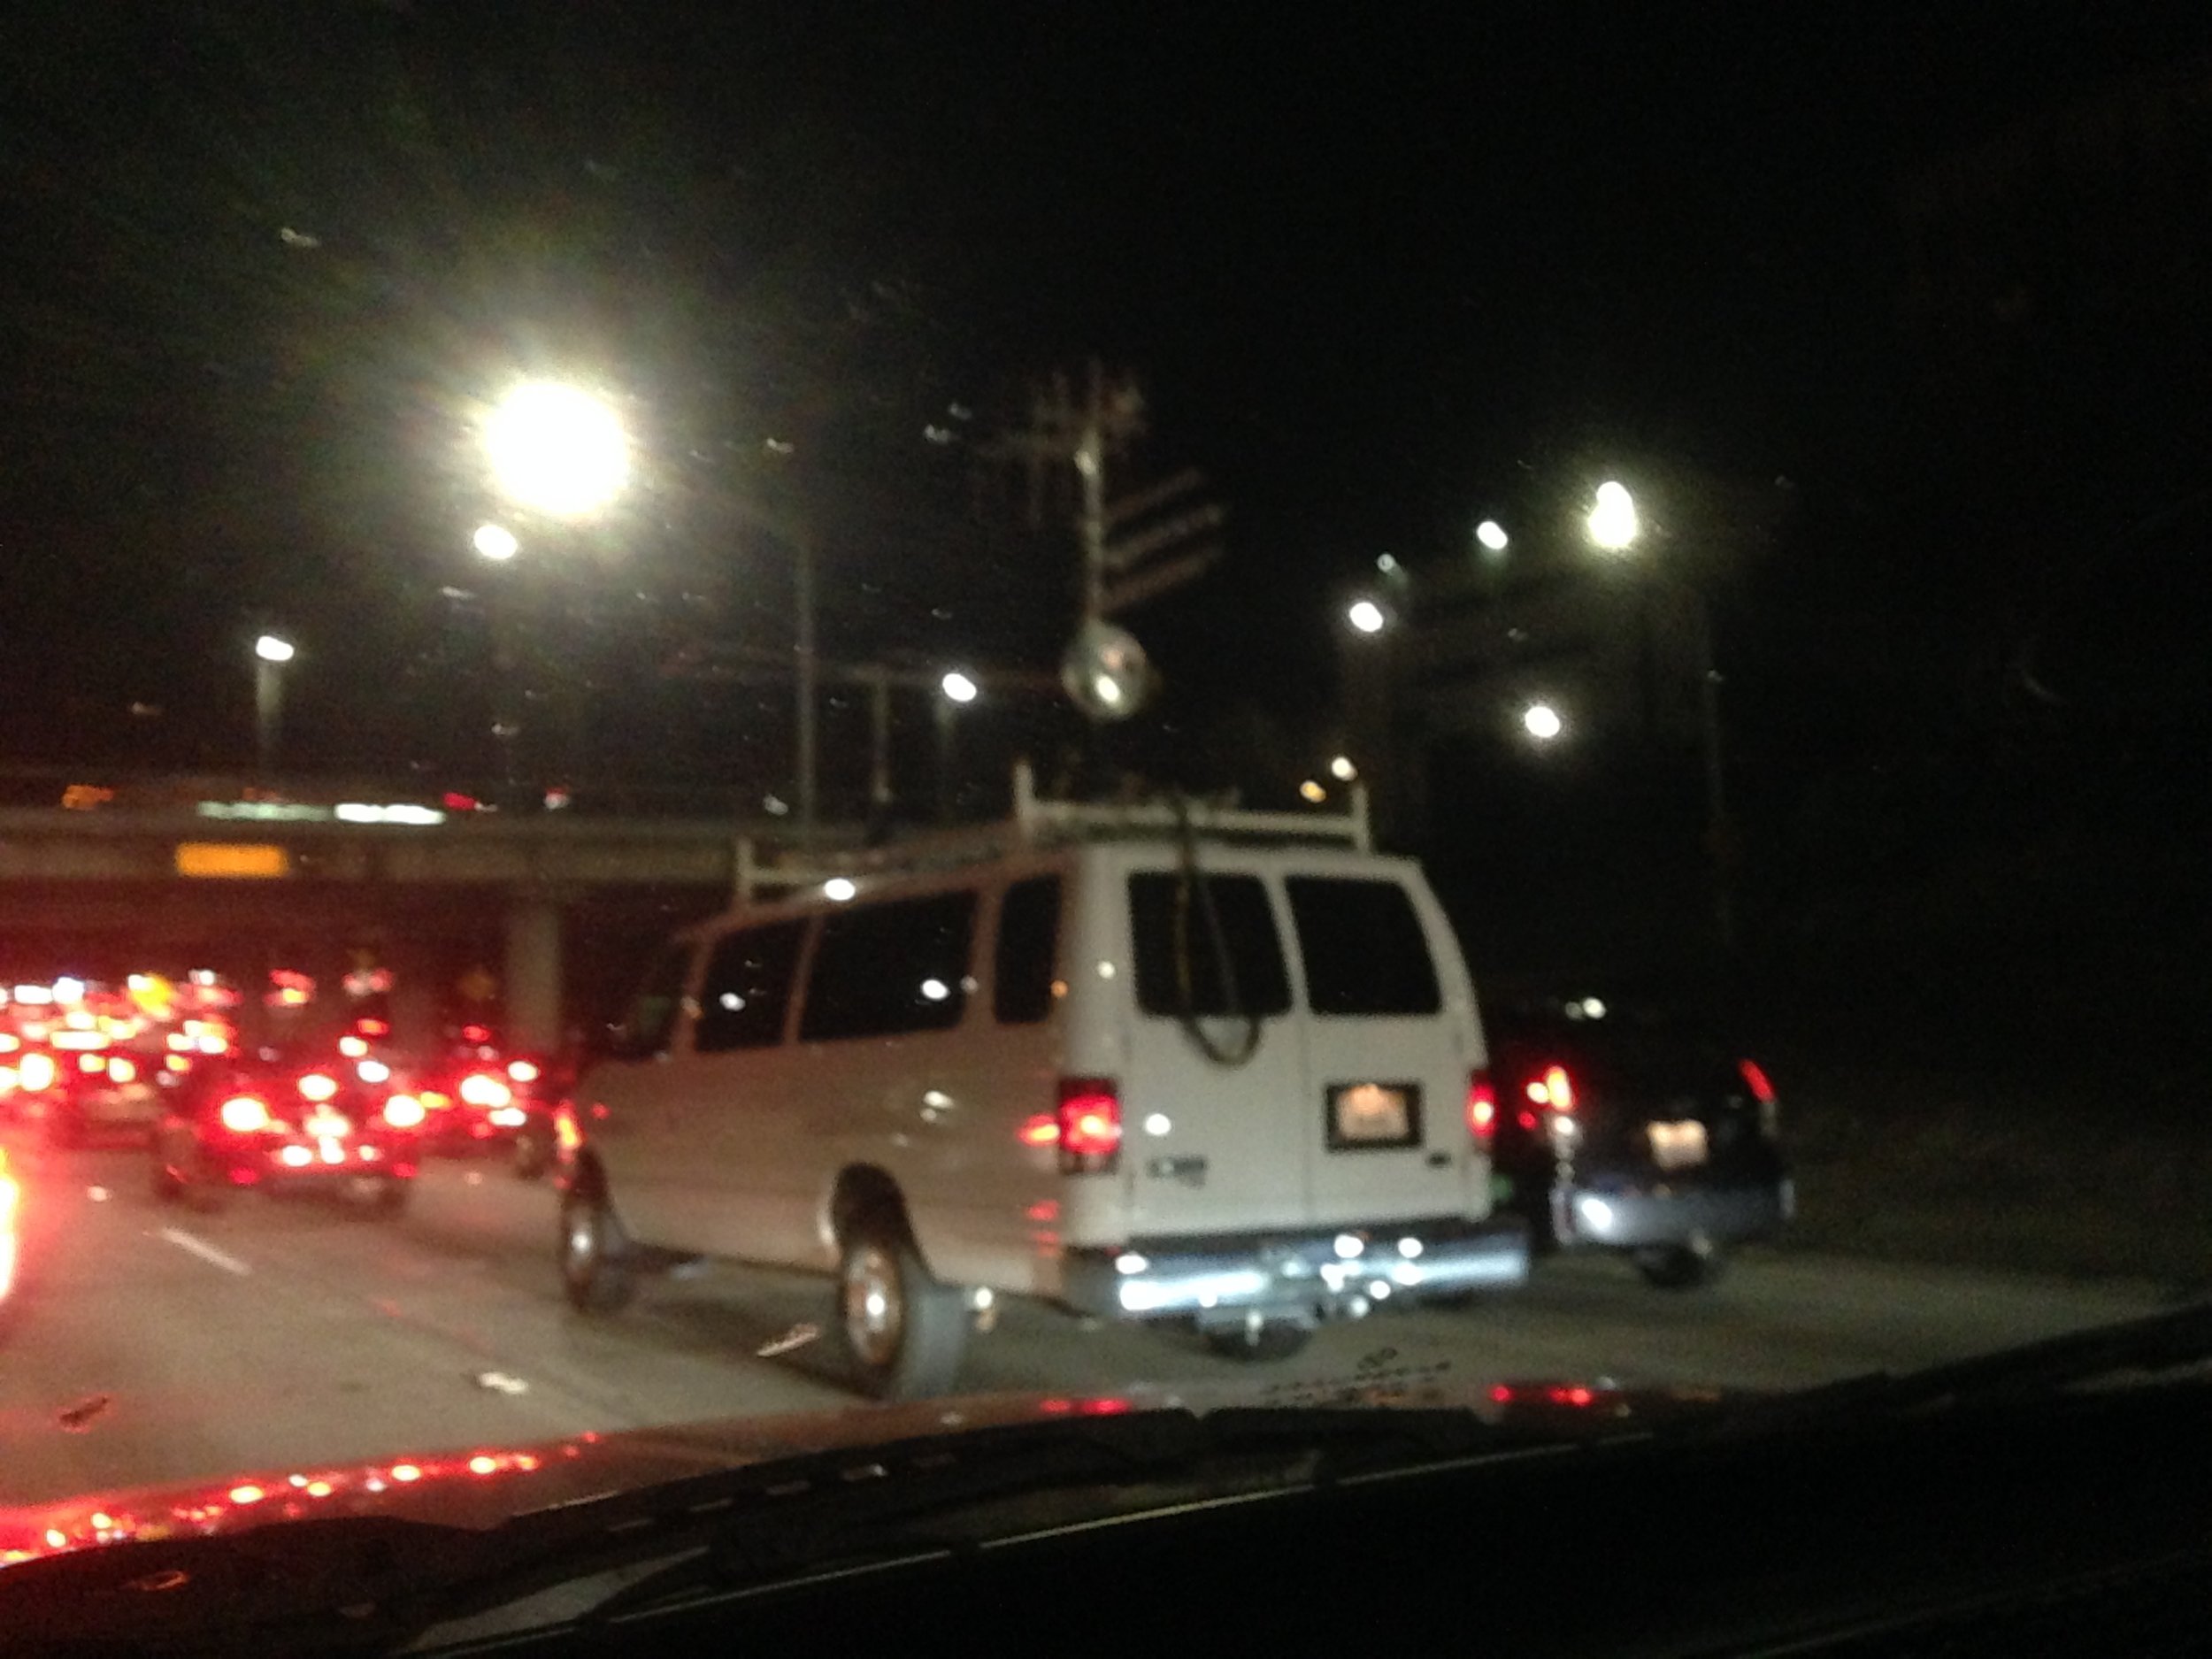  A mysterious unmarked communications van spotted by Forrest on the 110 Freeway in downtown LA, 1-17-2014 